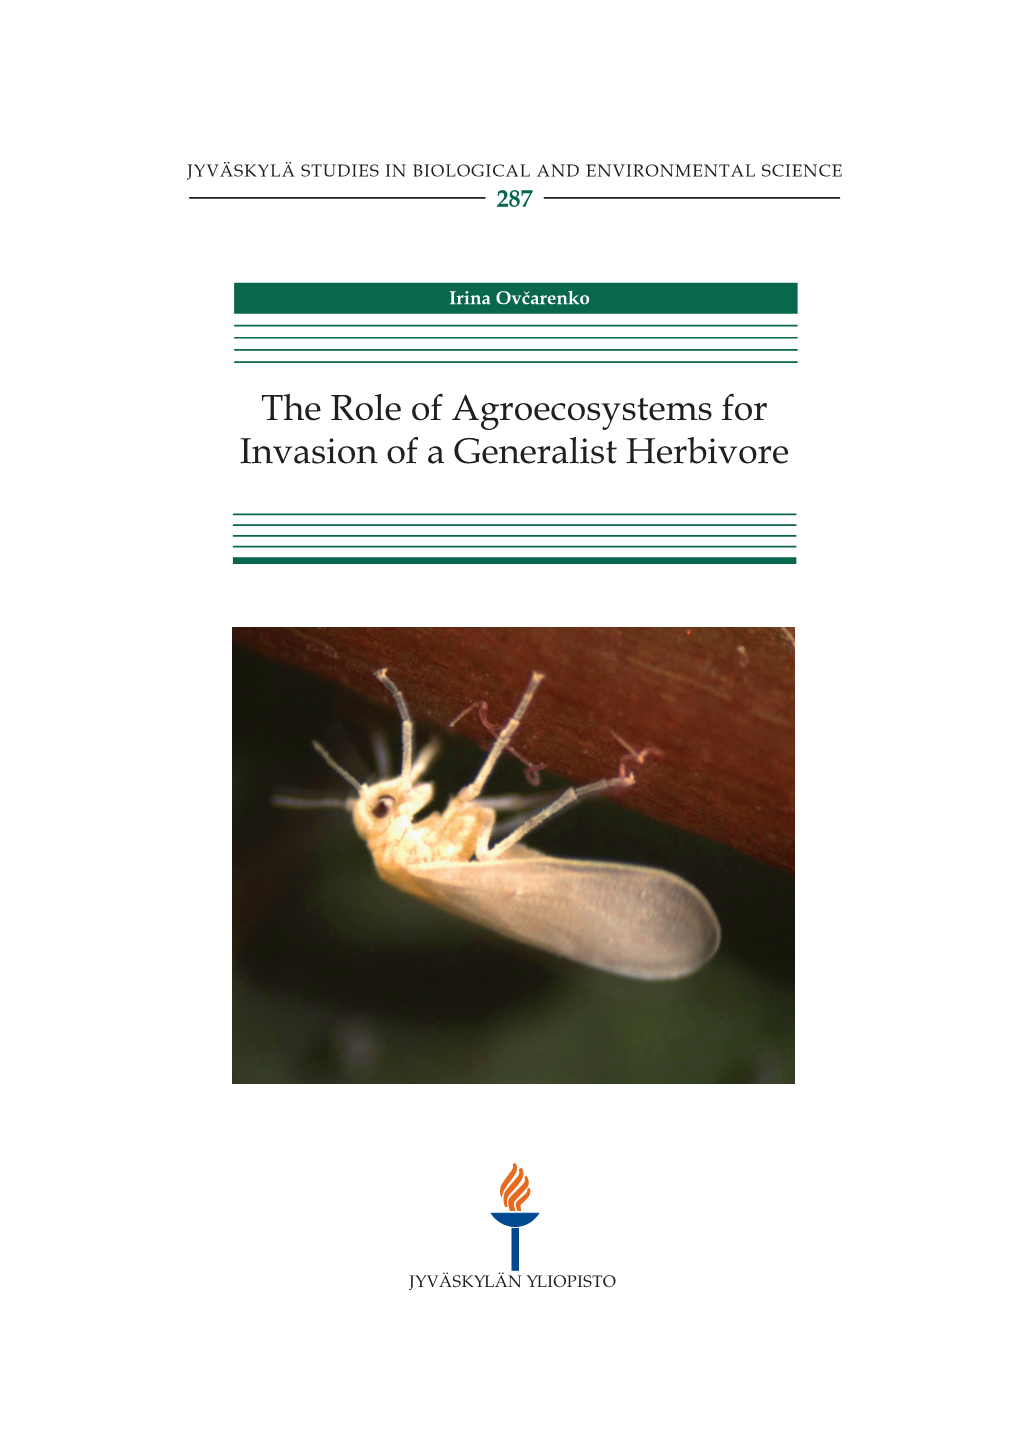 The Role of Agroecosystems for Invasion of a Generalist Herbivore JYVÄSKYLÄ STUDIES in BIOLOGICAL and ENVIRONMENTAL SCIENCE 287